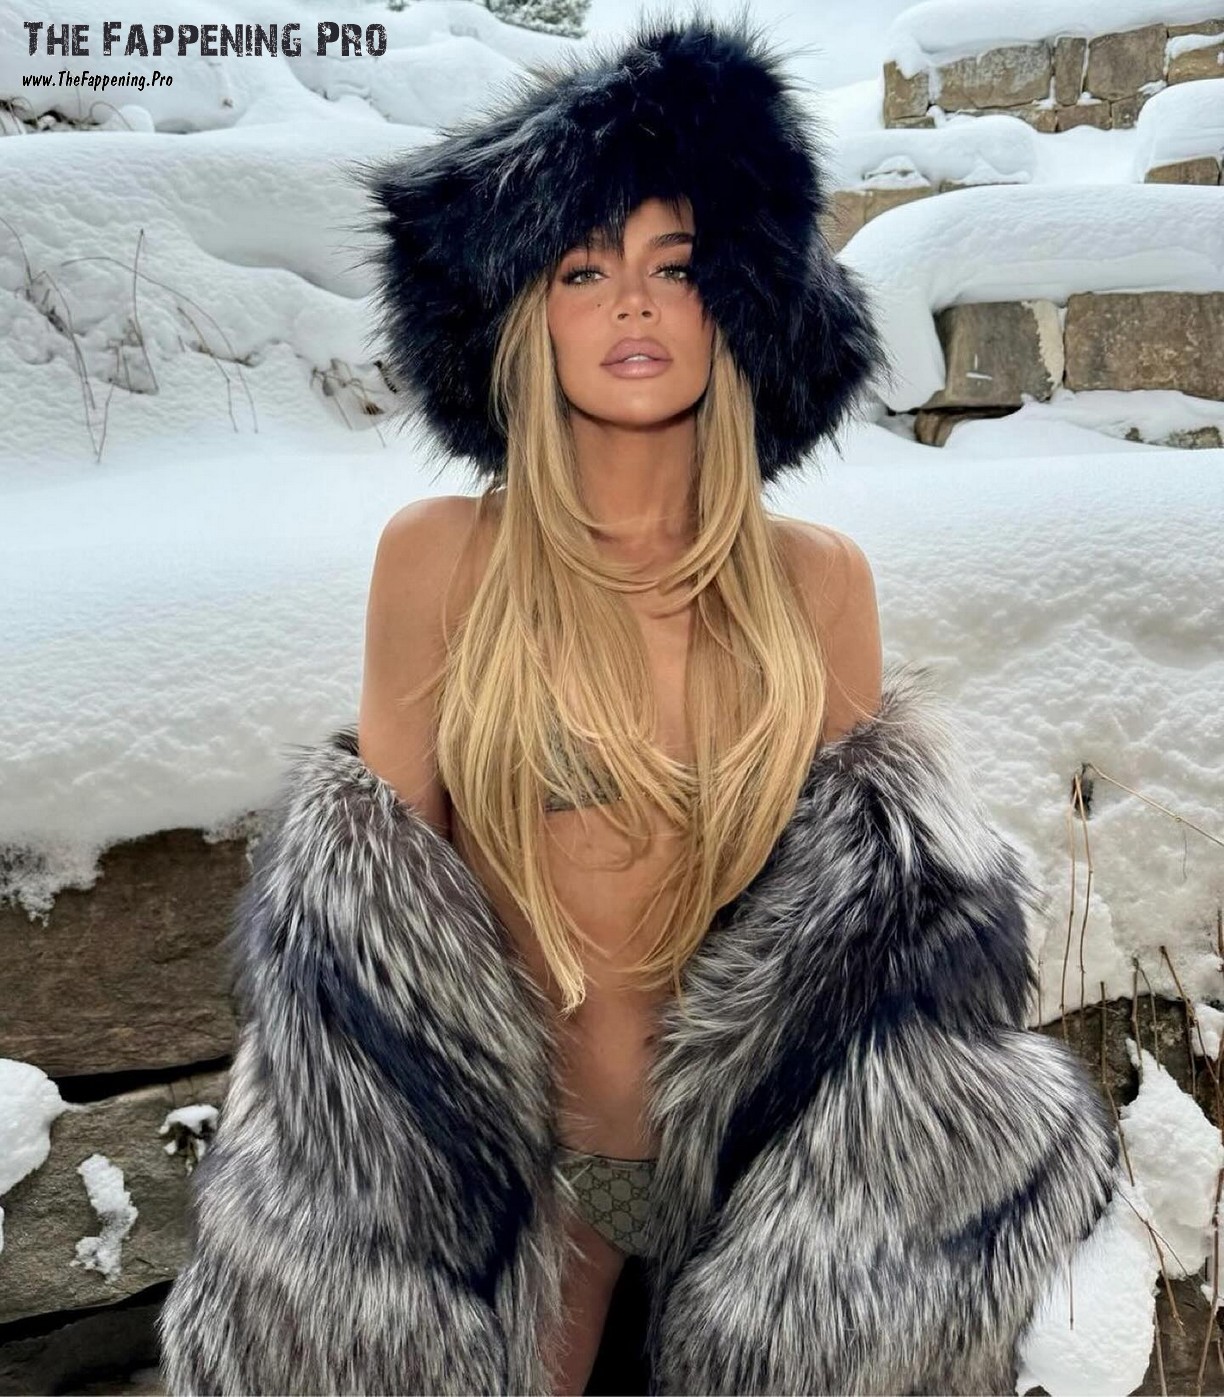 Step into Khloé Kardashian's winter wonderland as she stuns in a revealing bikini and fur cape in a recent photo shoot. With her fierce hairstyle crafted by celebrity stylist Ash K Holm, Khloé exudes confidence and beauty at 39 years old. Despite the chilly weather, these sizzling shots are guaranteed to set hearts racing. Don't miss out on witnessing Khloé's fierce and fabulous winter look!